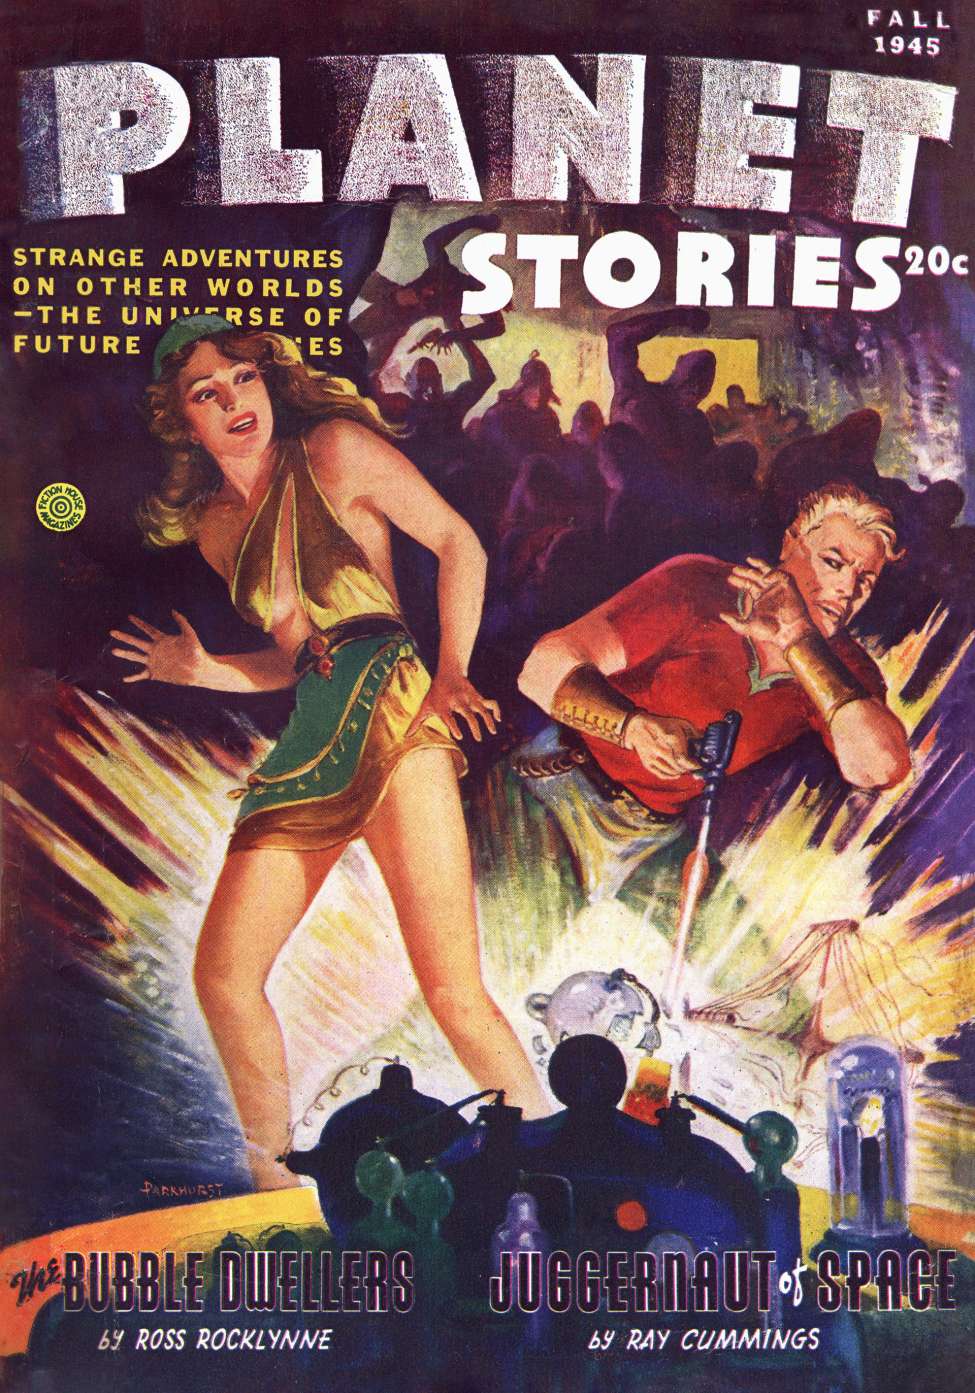 Comic Book Cover For Planet Stories v2 12 - Juggernaut of Space - Ray Cummings